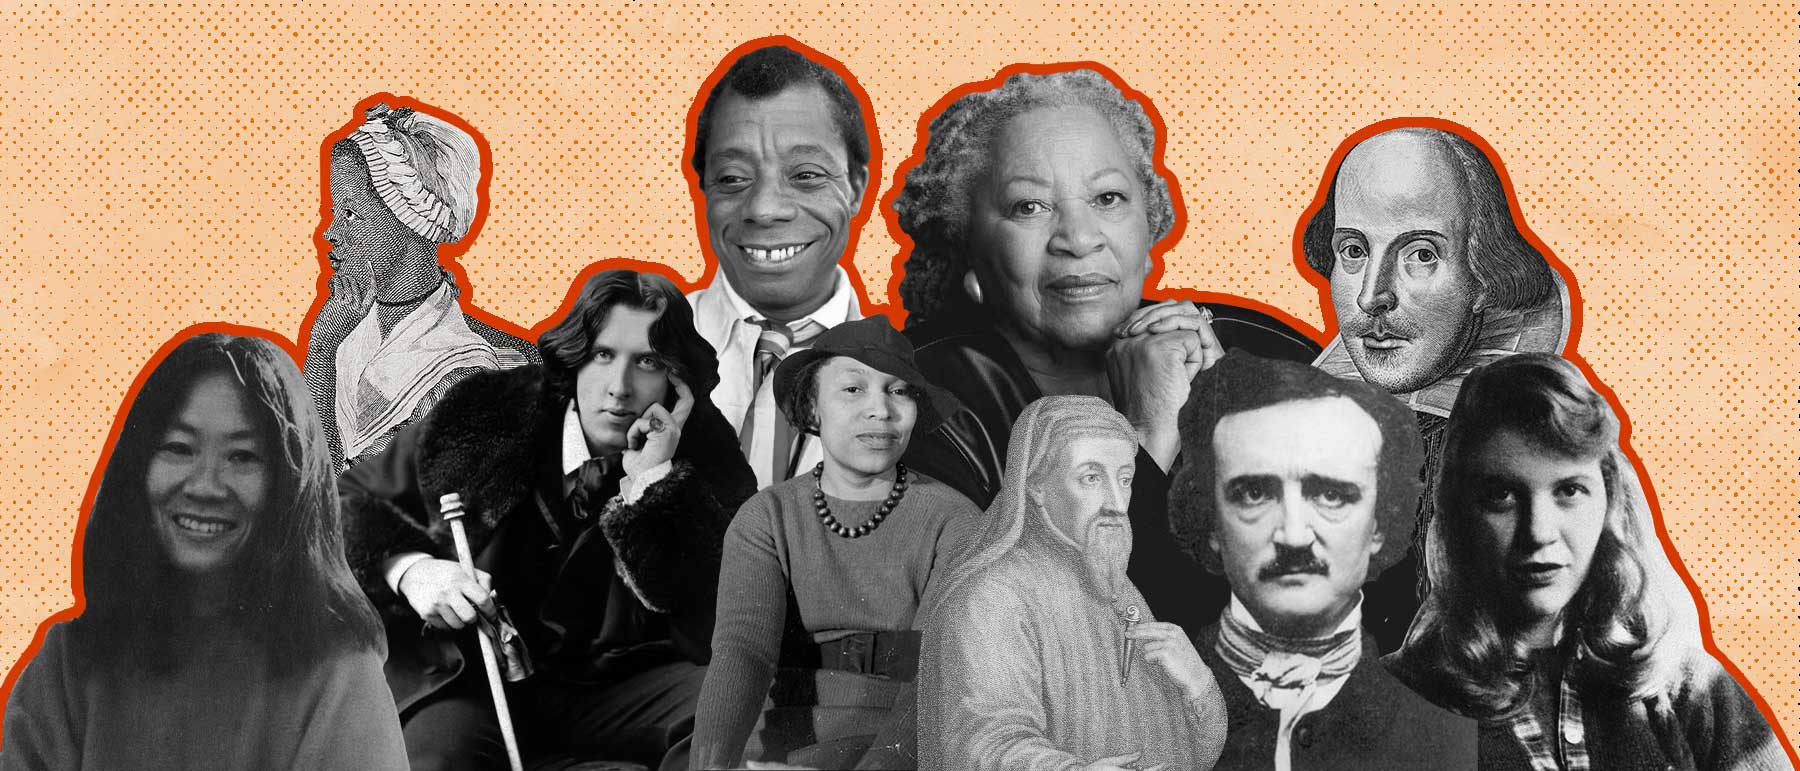 a collage of famous authors such as james baldwin, sylvia plath, william shakespeare, toni morrison, oscar wilde and others